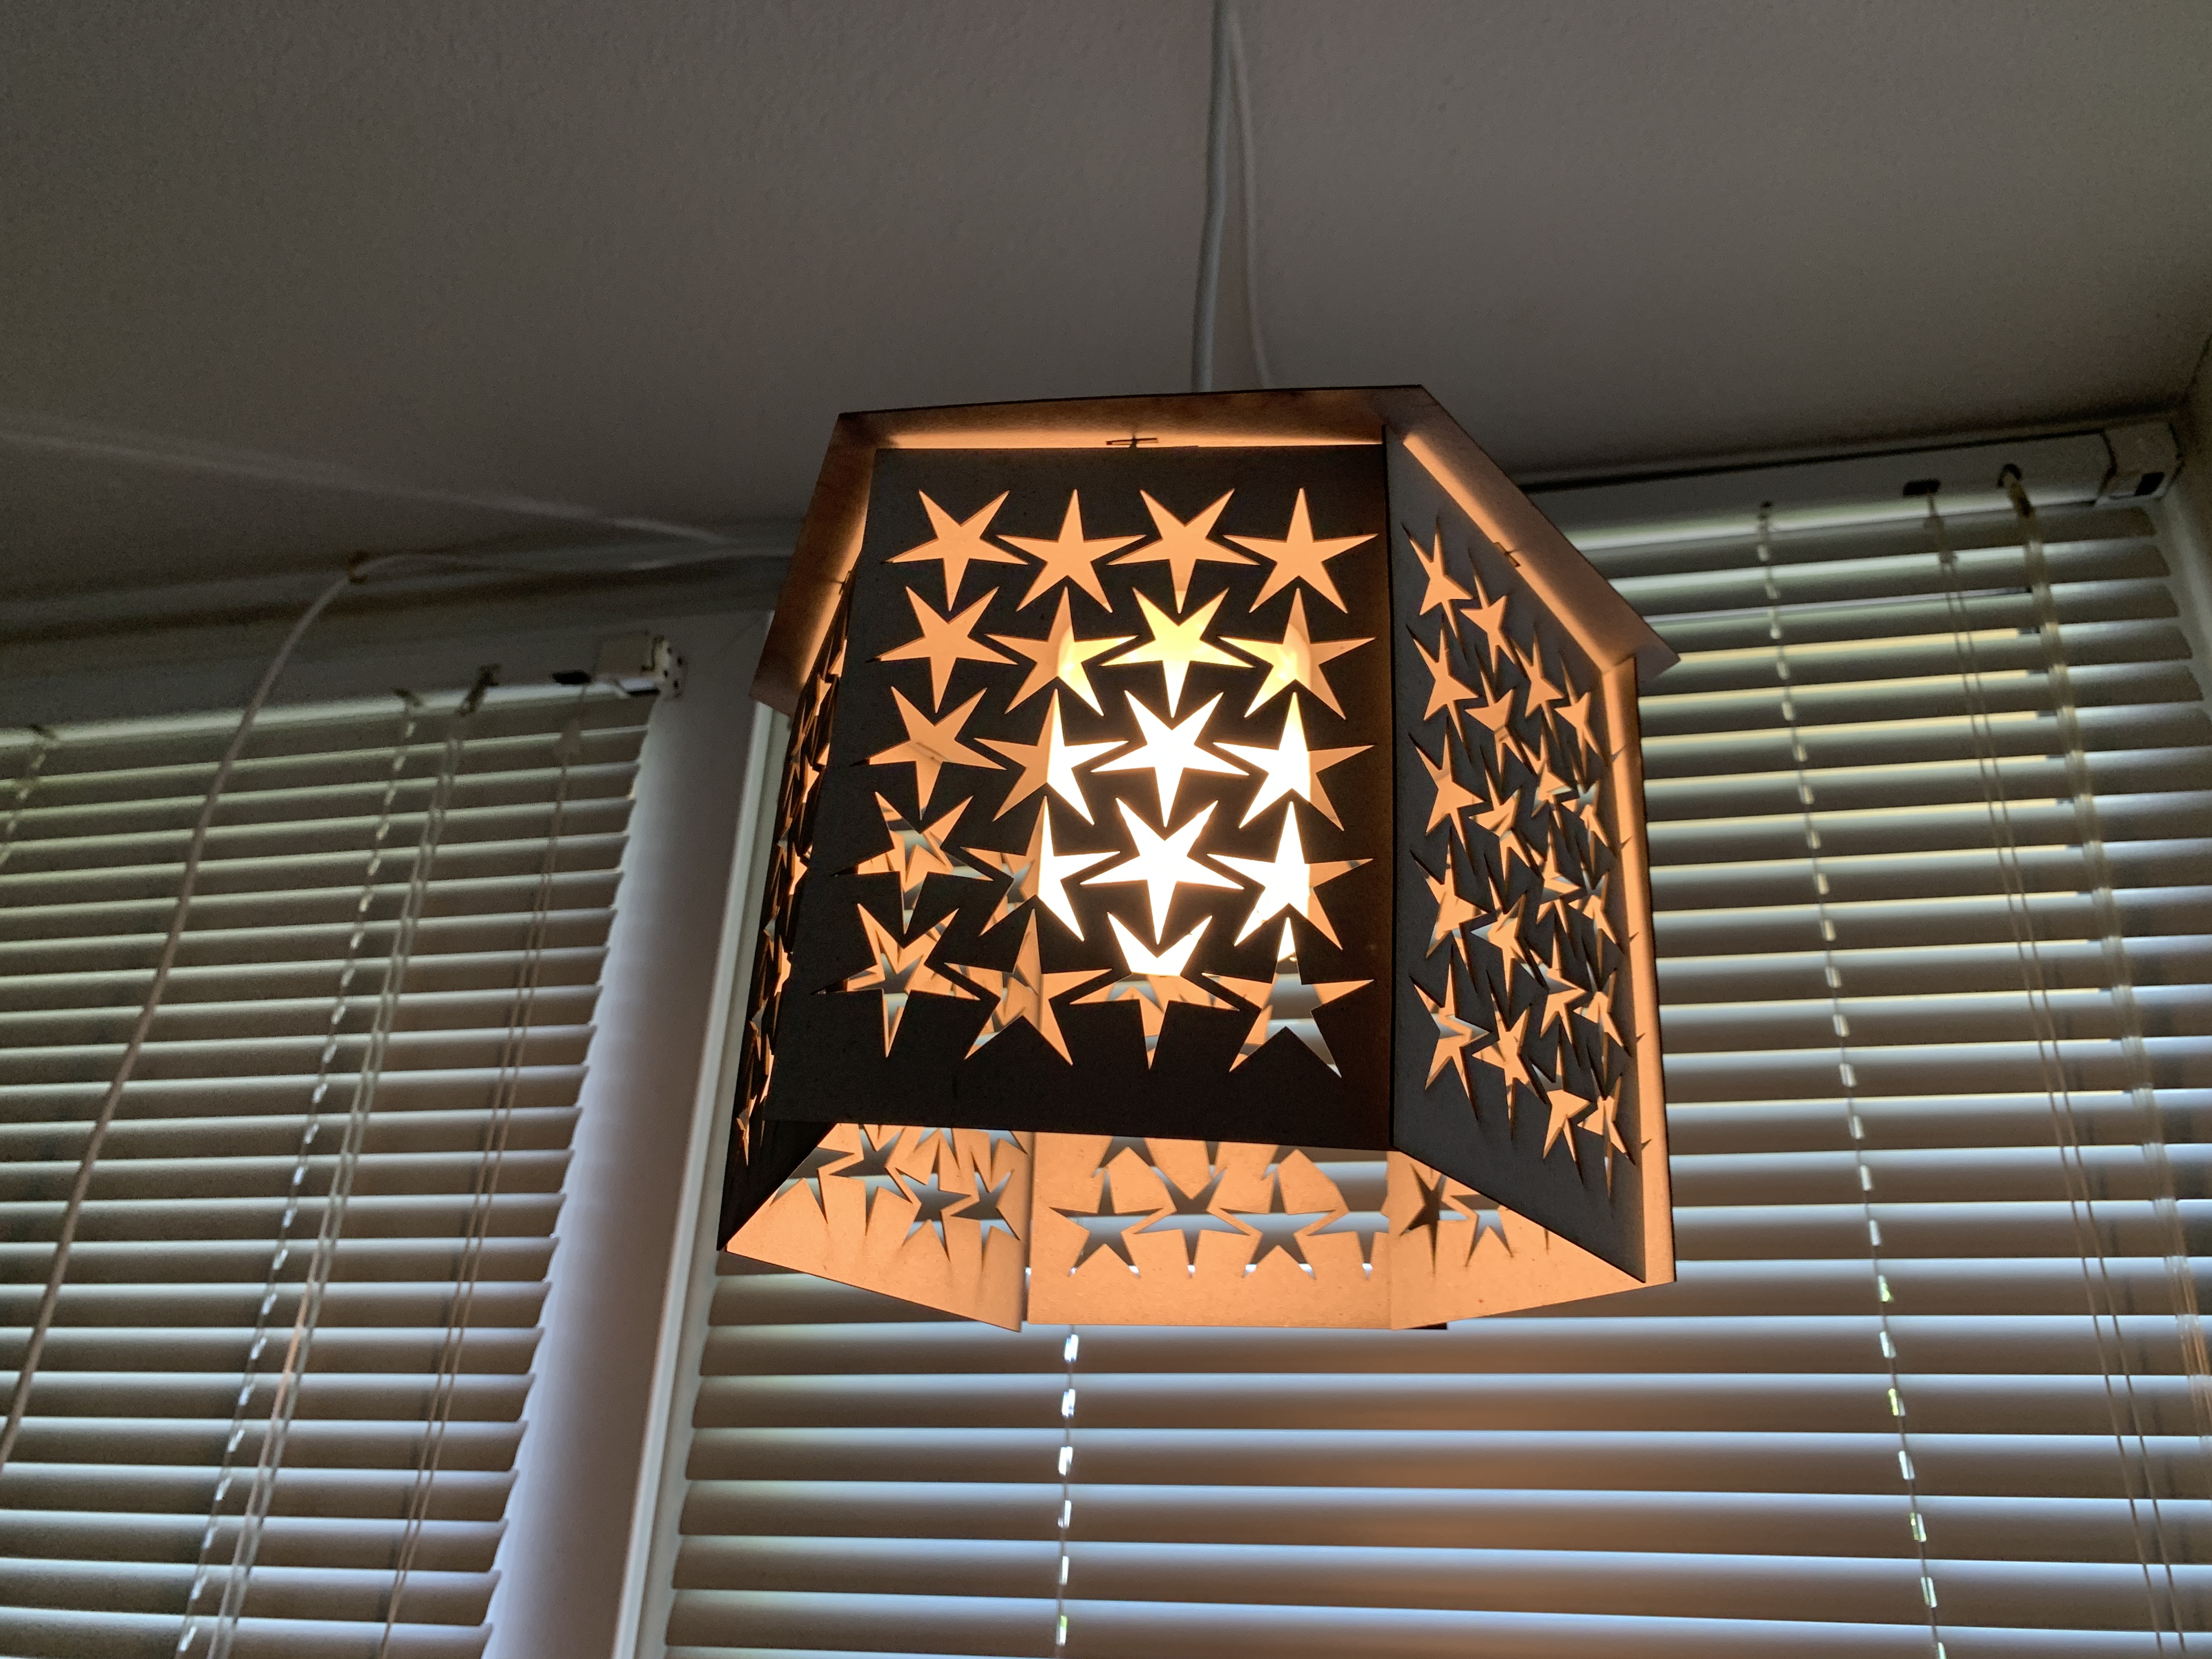 a pendant lamp made of a laser cut plywood hexagon and 3D printed cylinder, with star shapes cut out of the pieces.